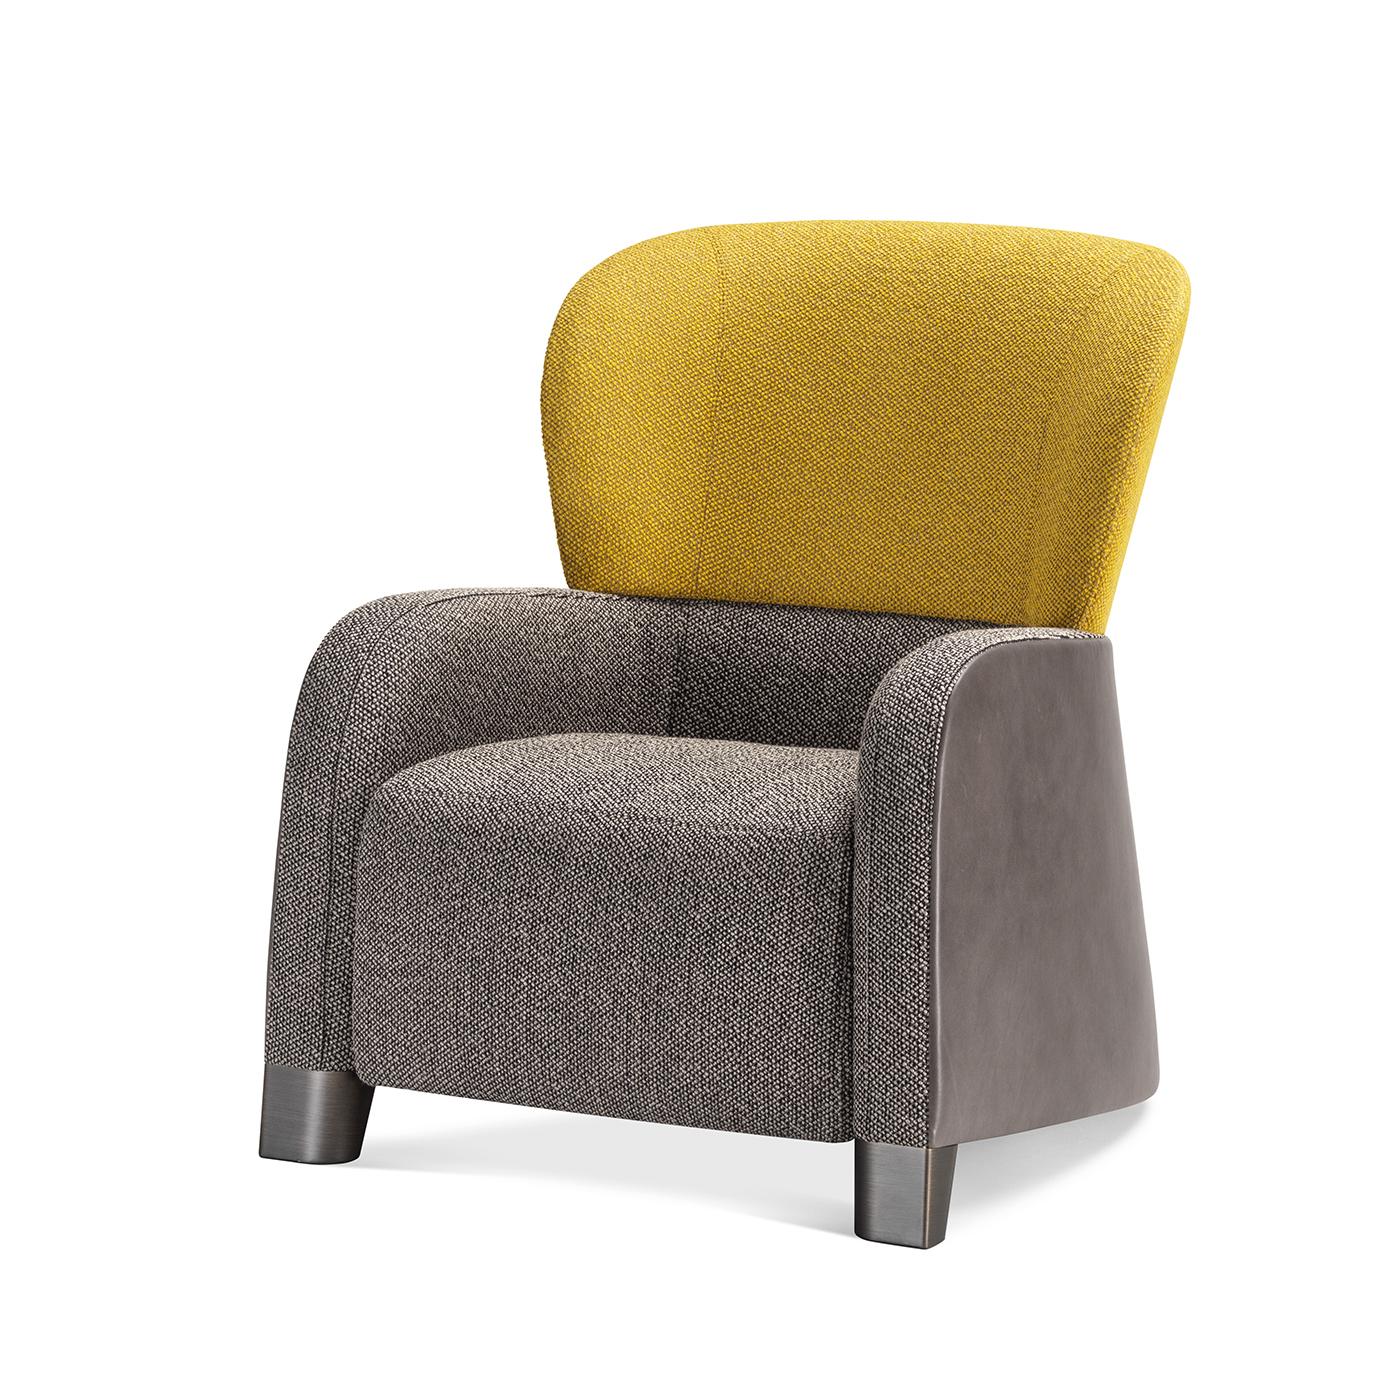 This exclusive armchair boasts a welcoming design resulting equally apt to fit in commercial or residential settings. Raised on bold feet, the silhouette is cleverly sculpted and stuffed to provide the necessary amount of comfort even in case of